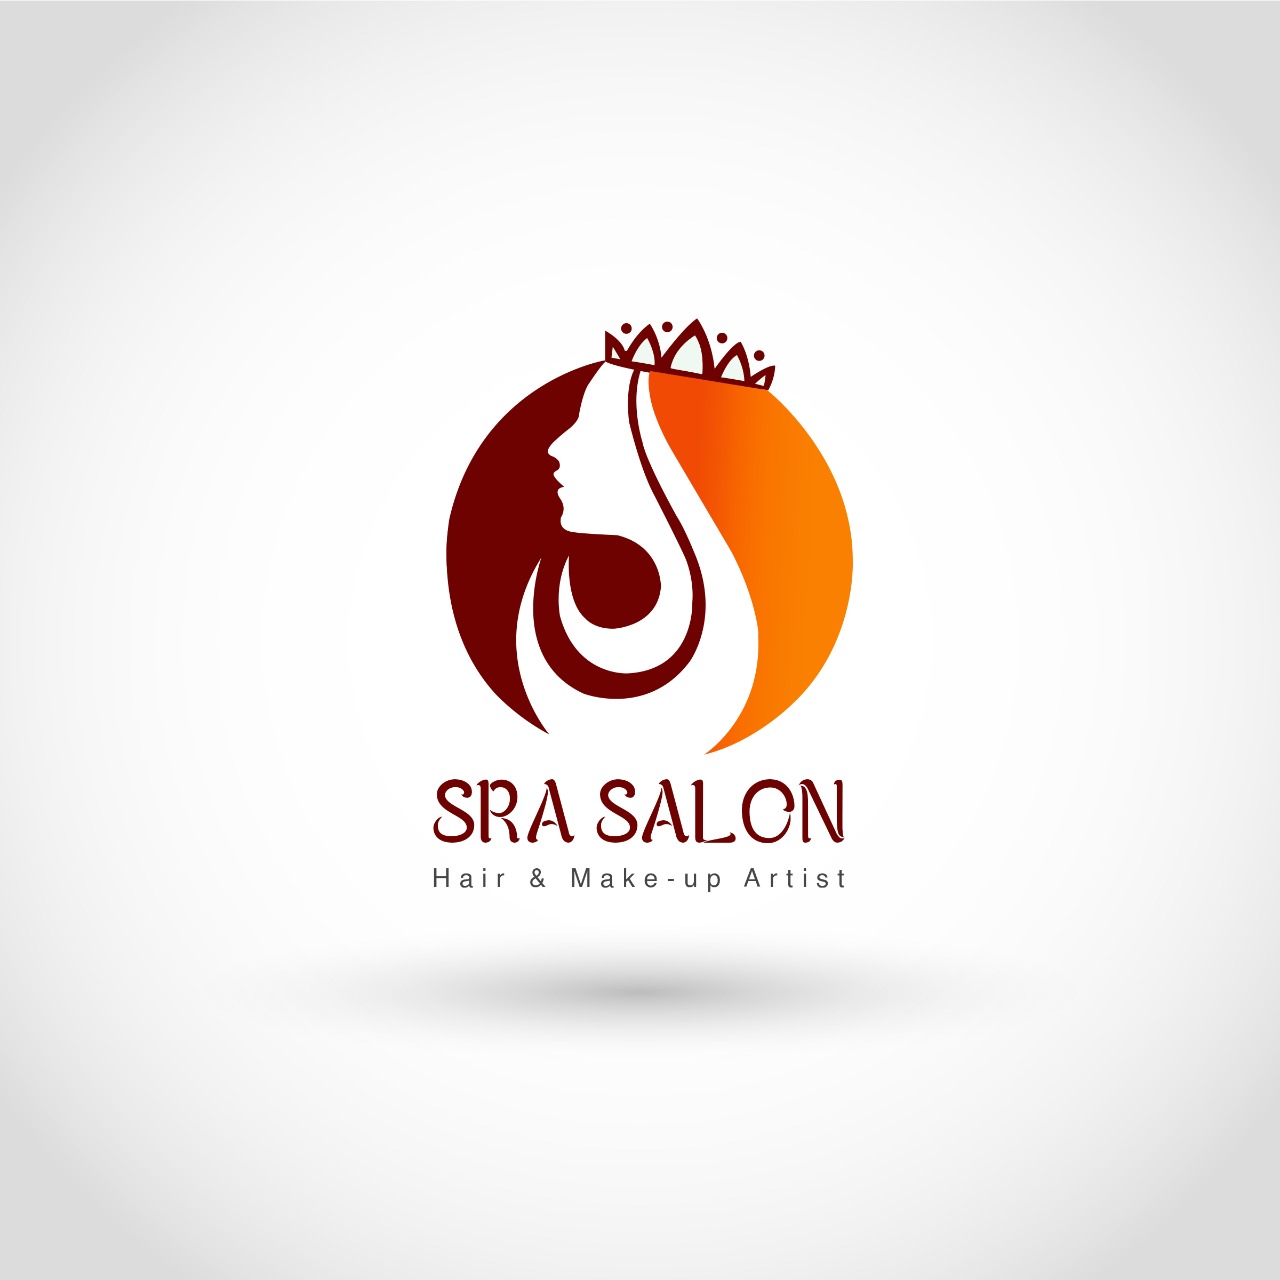 Hair Styling for Women in Bangalore, Hair Style Salons for Ladies | Sulekha  Bangalore